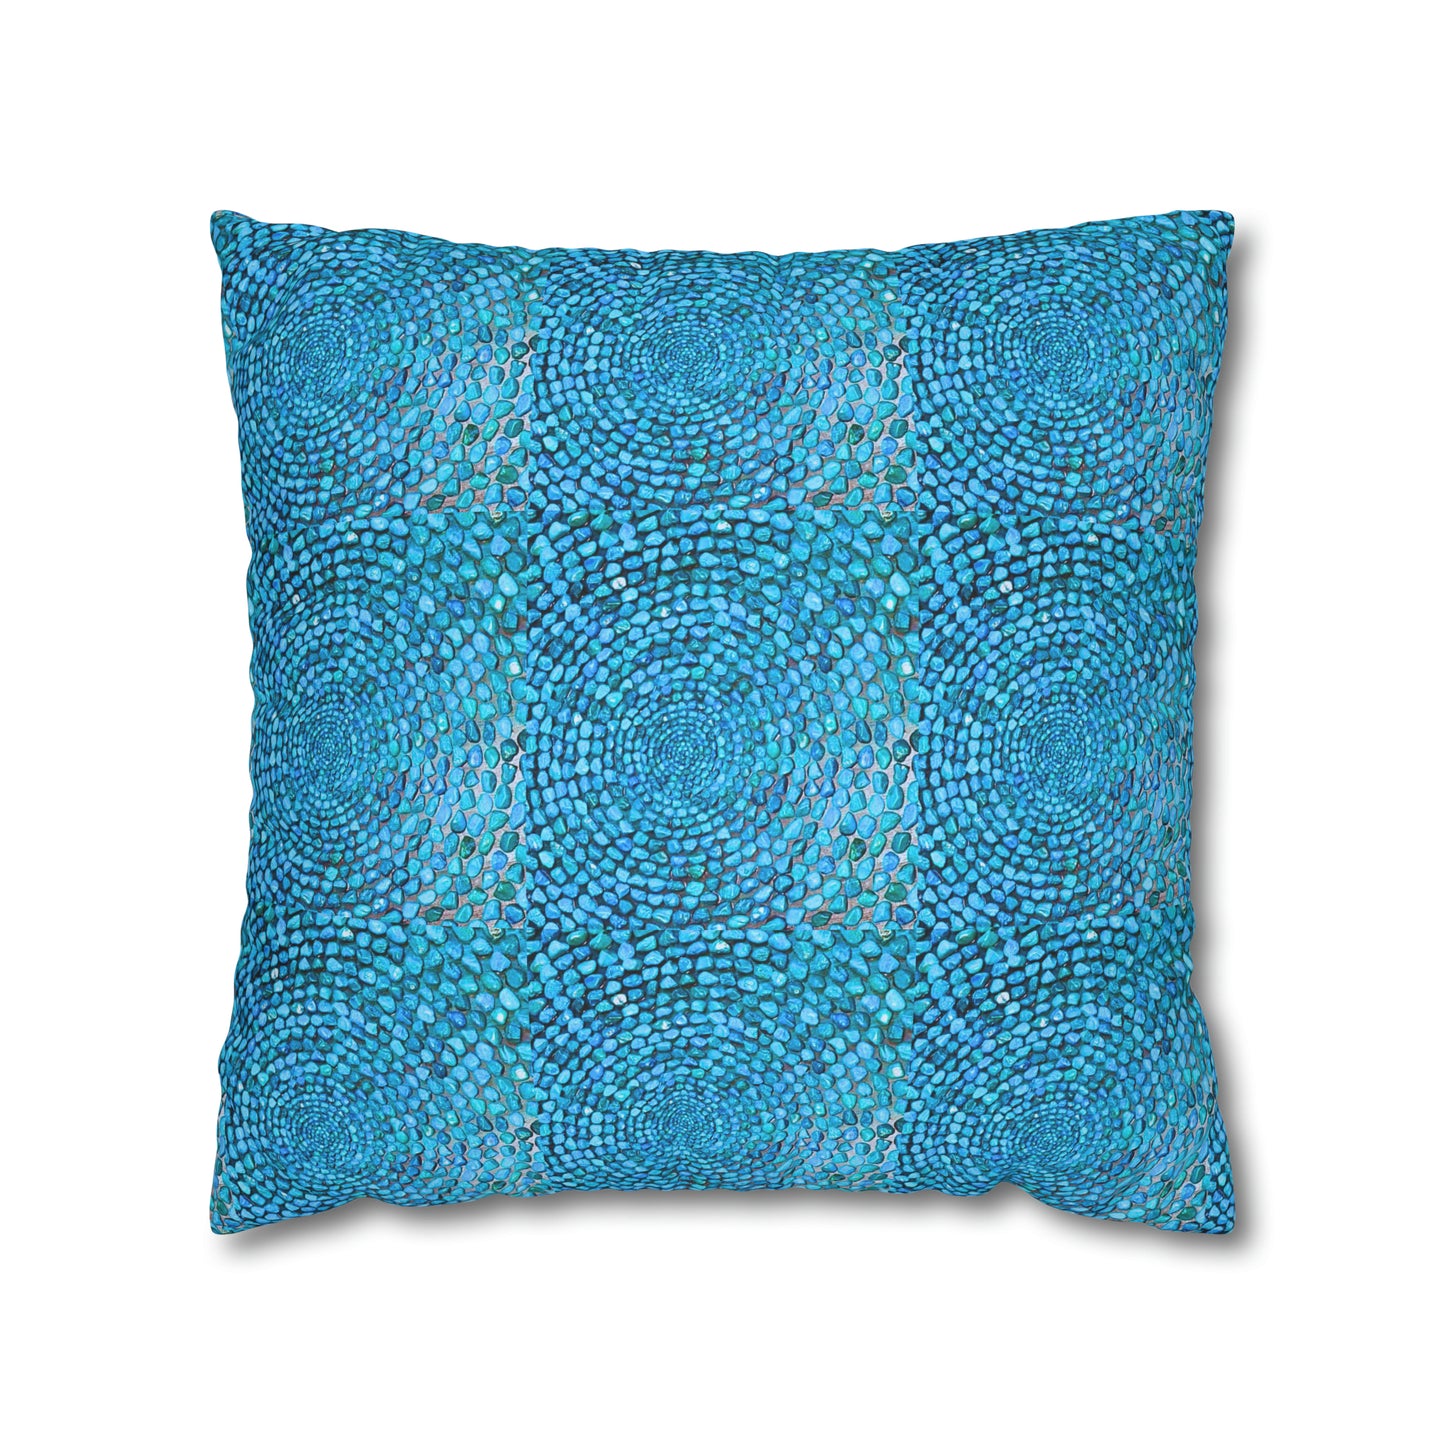 Turquoise Stones Natural Southwestern Decorative Accent Spun Polyester Pillow Cover